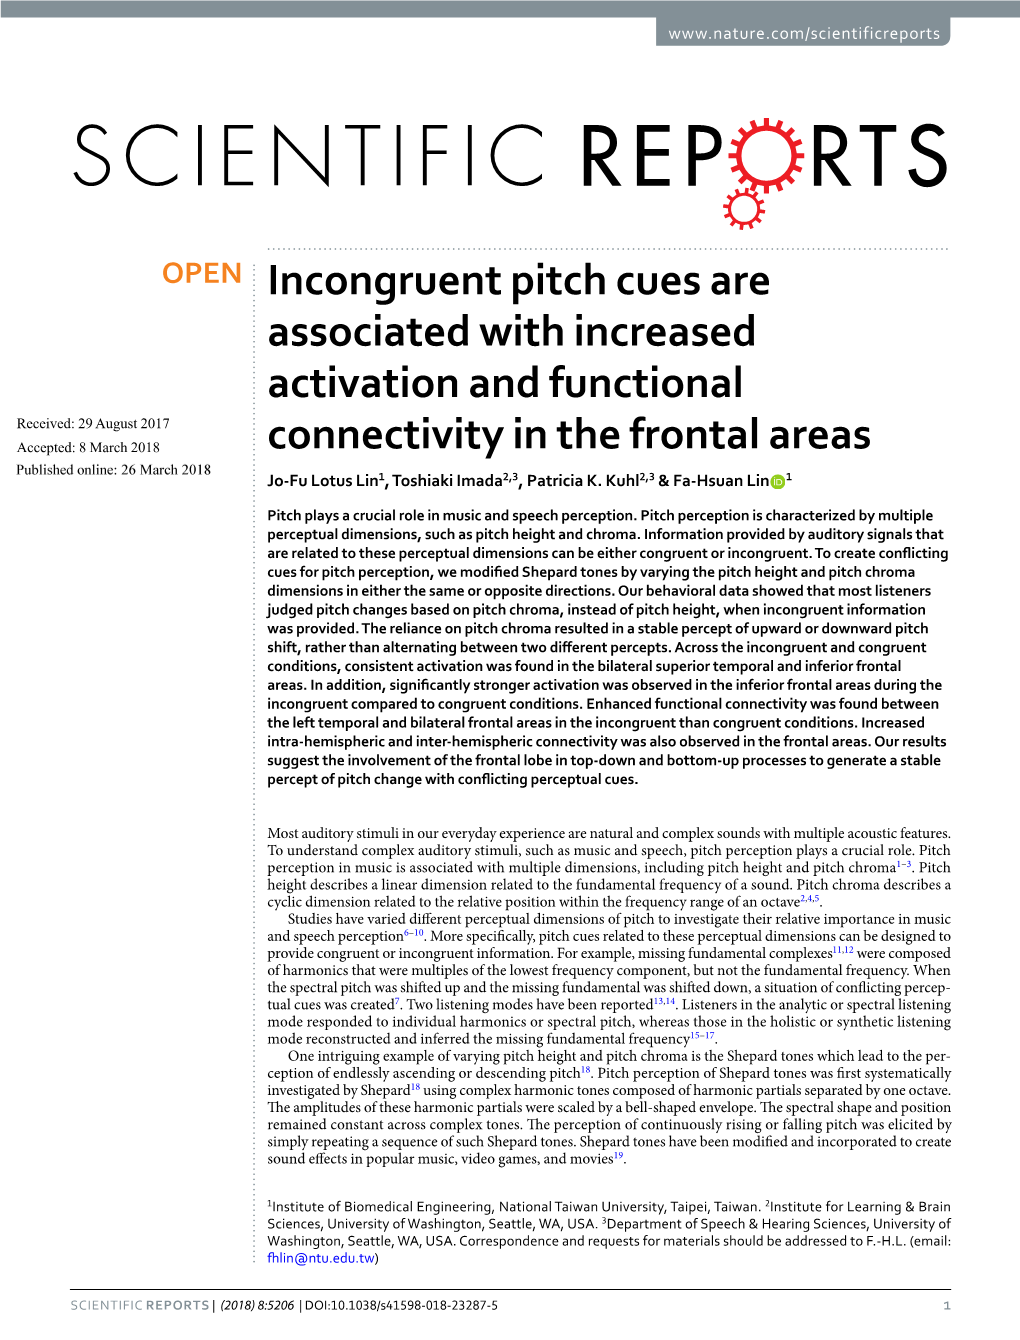 Incongruent Pitch Cues Are Associated with Increased Activation And